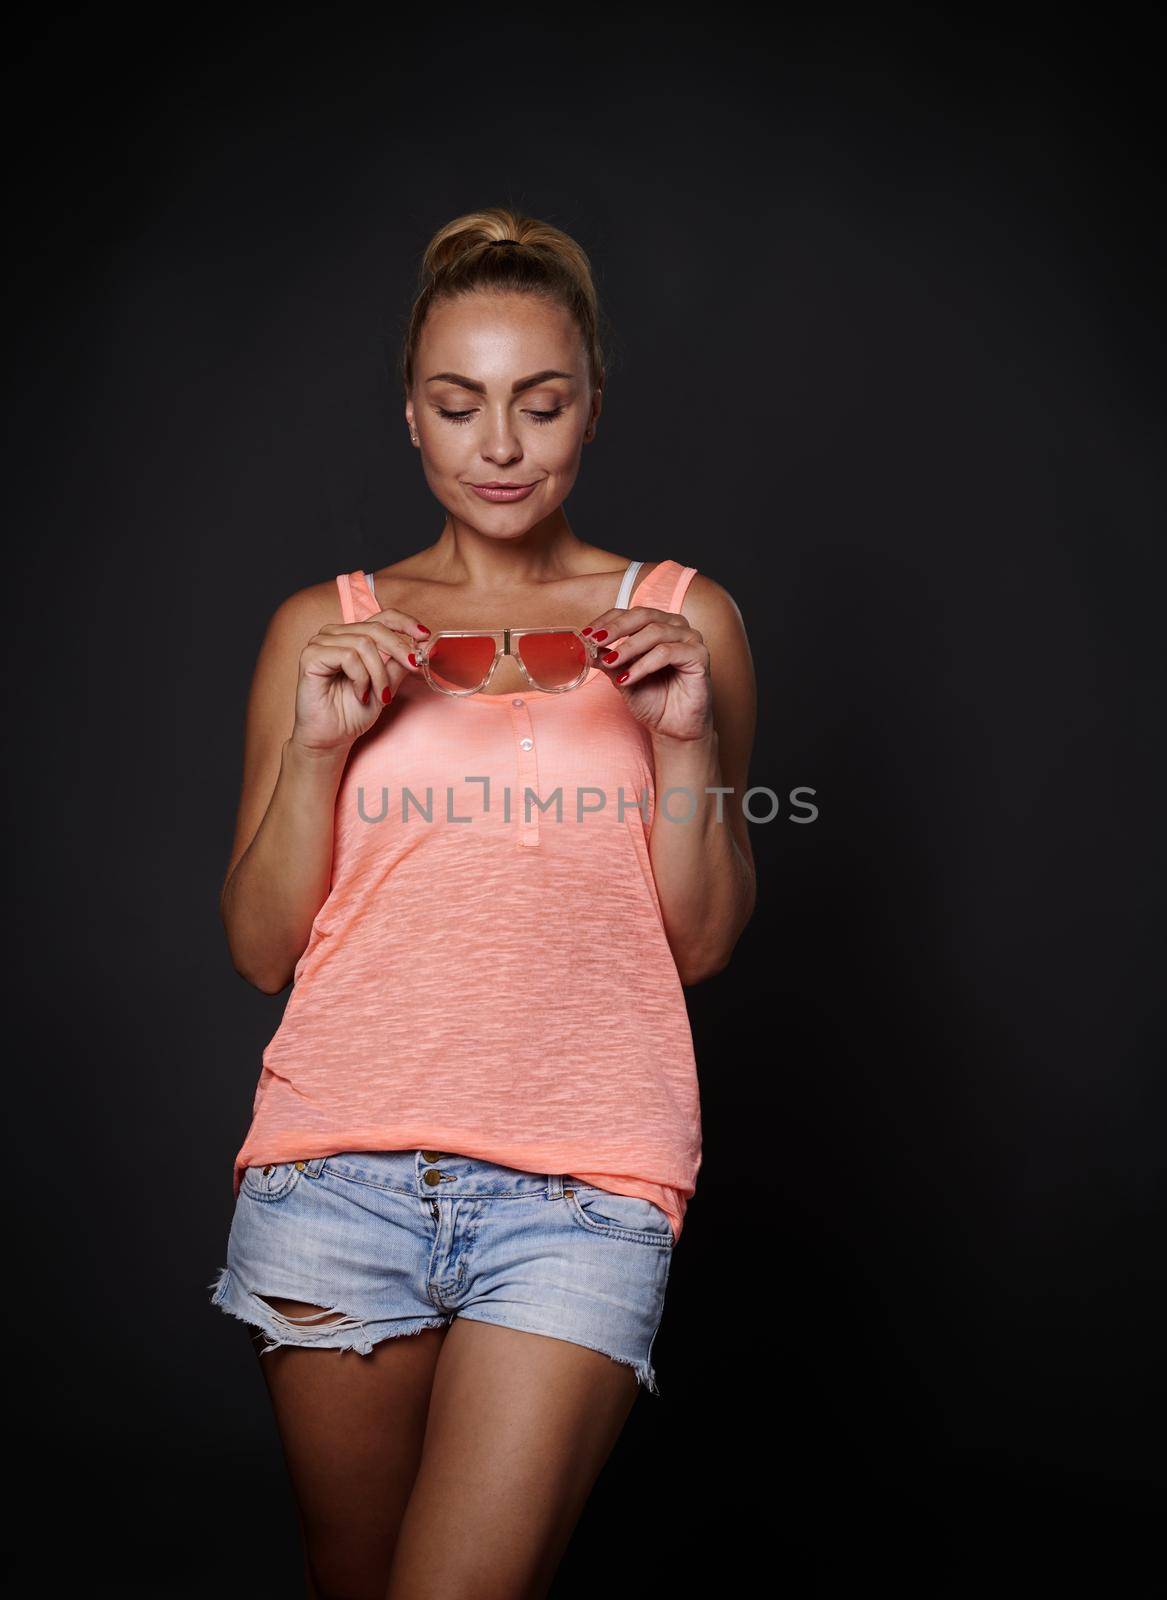 Charming sexy young blonde Caucasian pretty woman with tanned skin, aesthetic fit body in denim shorts, pink top holding sunglasses and smiling posing over black background with copy ad space